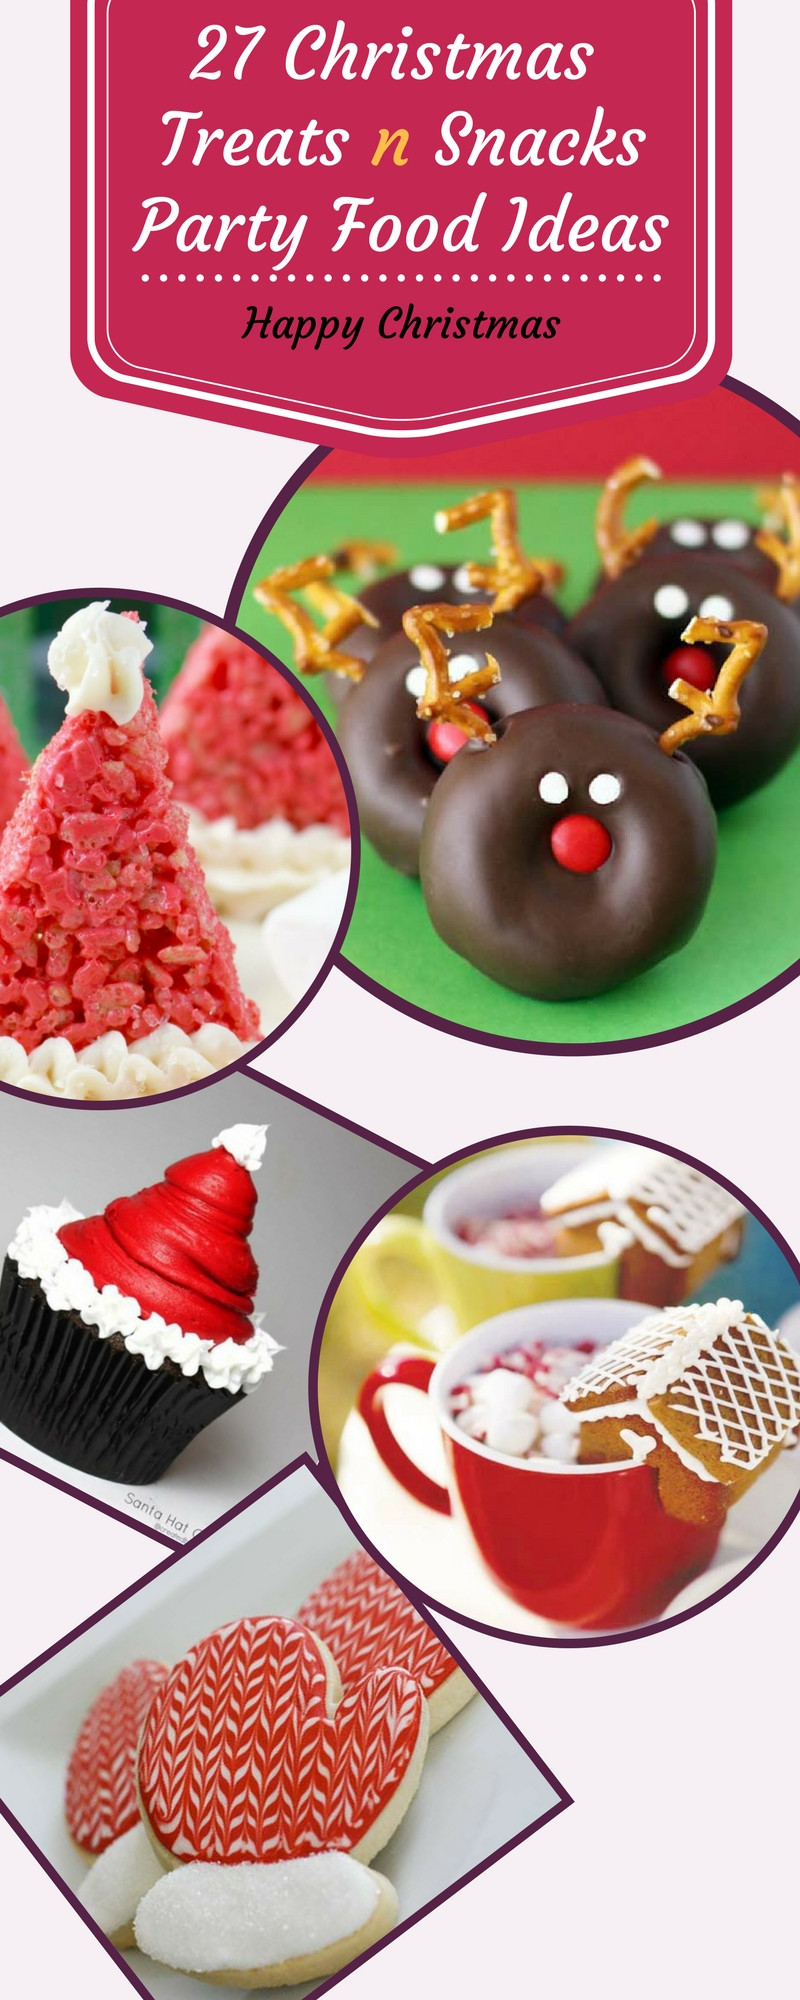 Holiday Party Food Ideas Kids
 27 Christmas Party Food Ideas Healthy Christmas Treats n